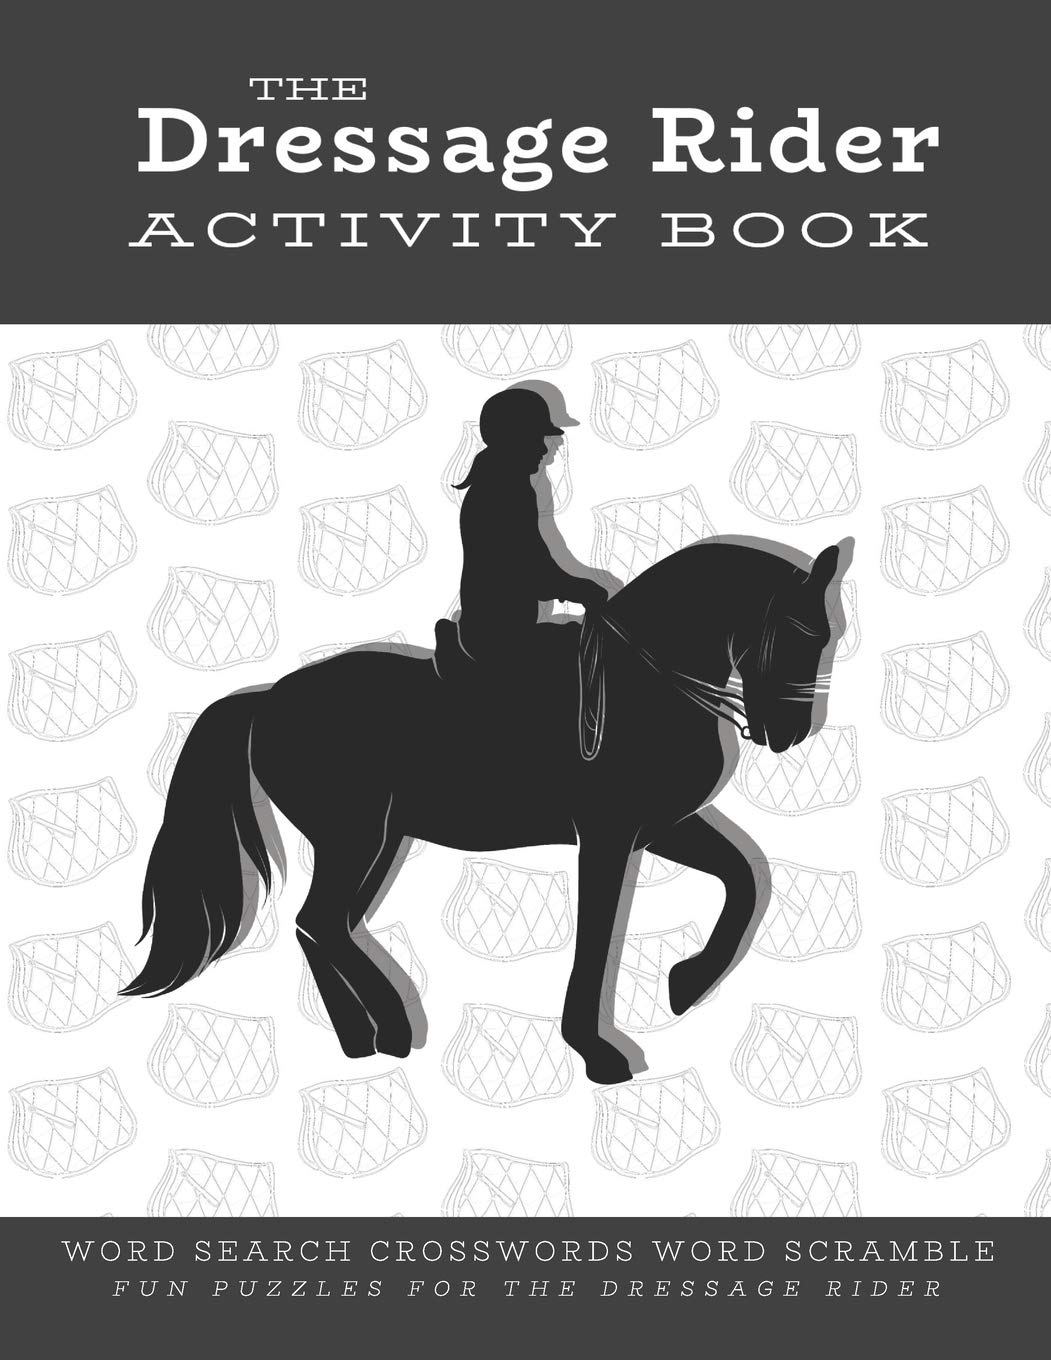 Dressage Rider Activity Book Fun Puzzles for the Dressage Rider - A Gift for Relaxation and Stress Relief